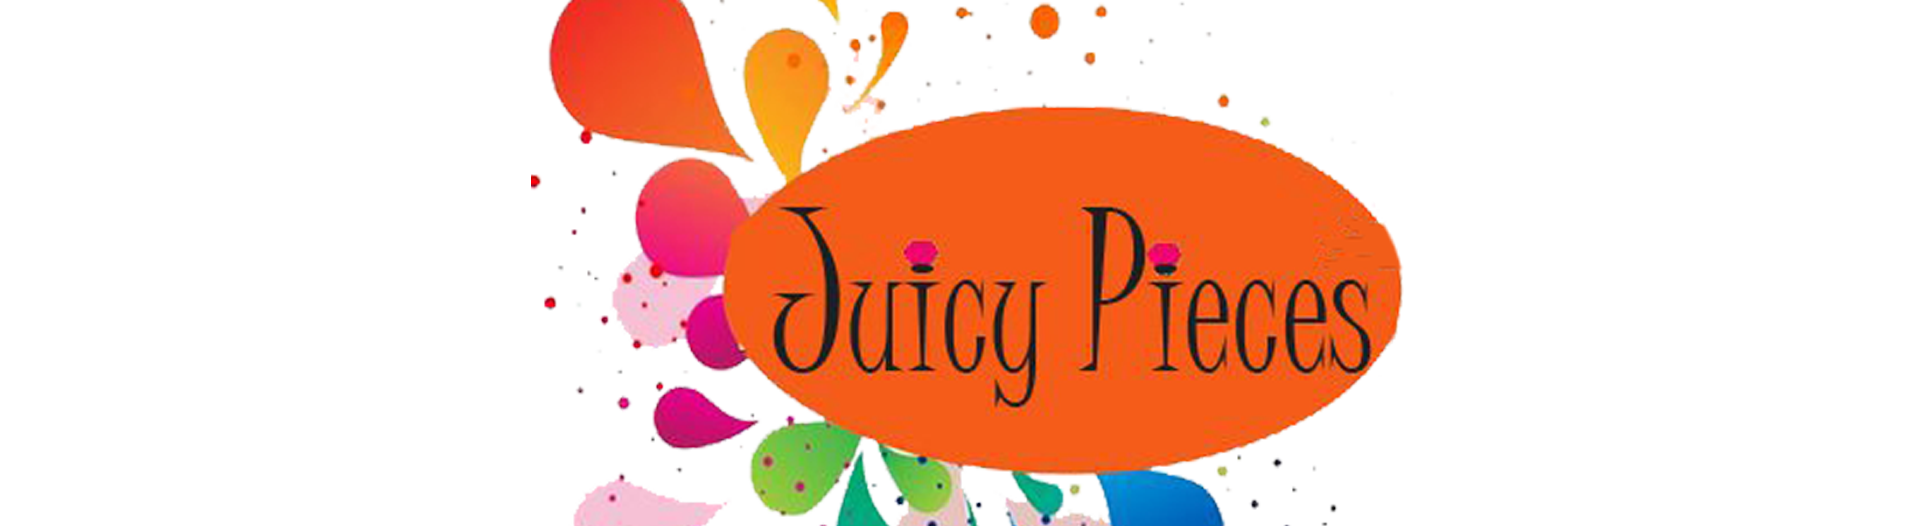 Juicy Pieces Accessories and More